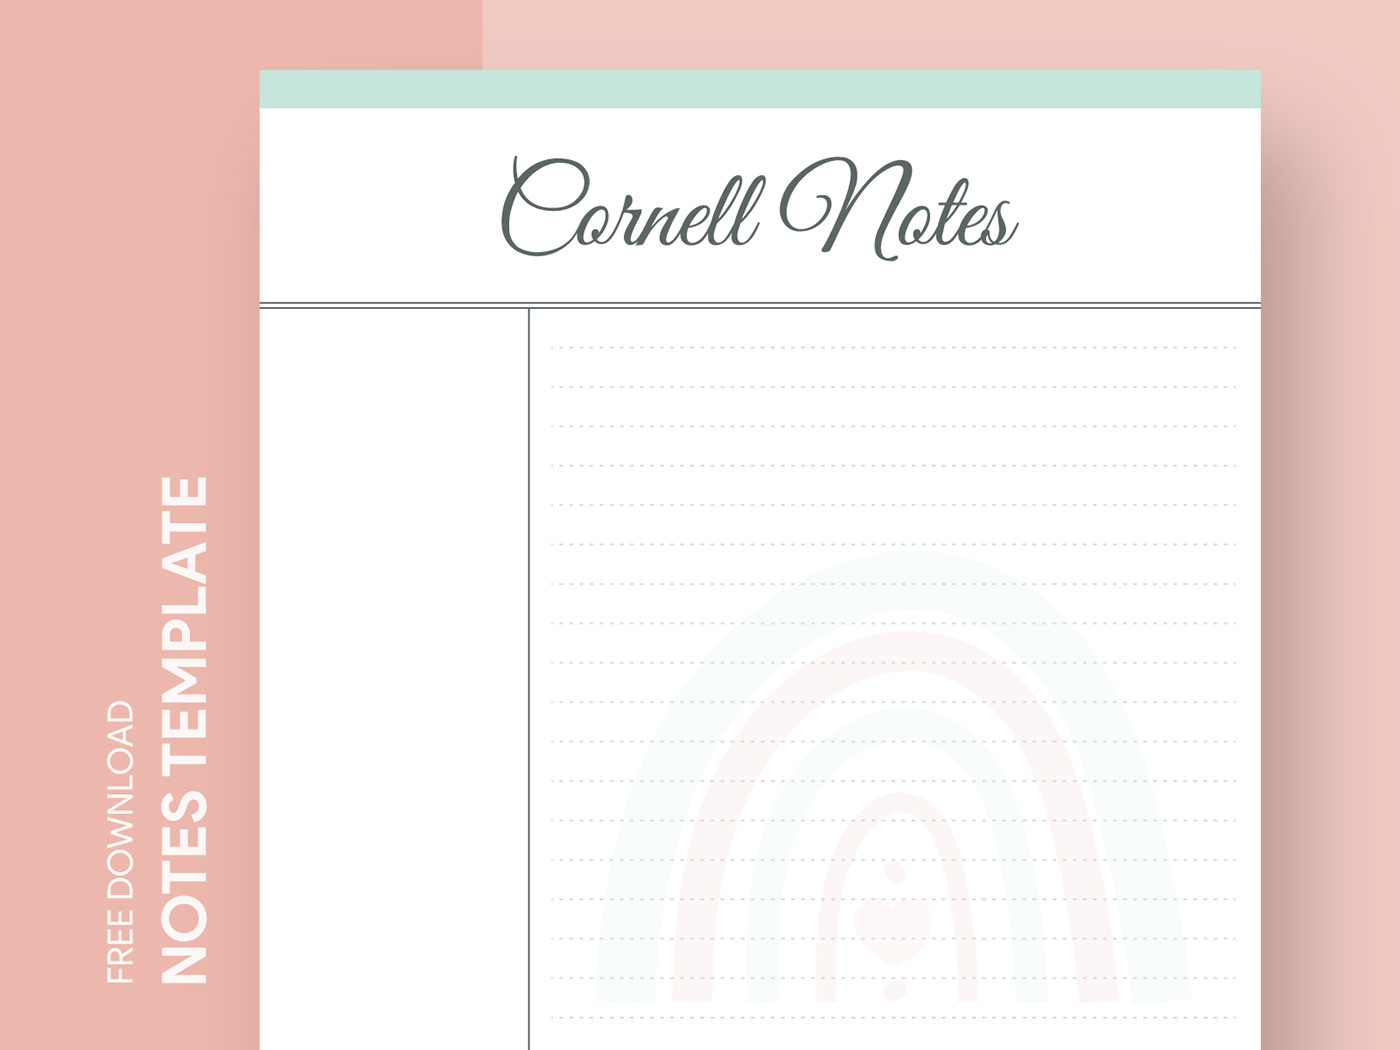 design docs document google note notes template word Cornell notepaper